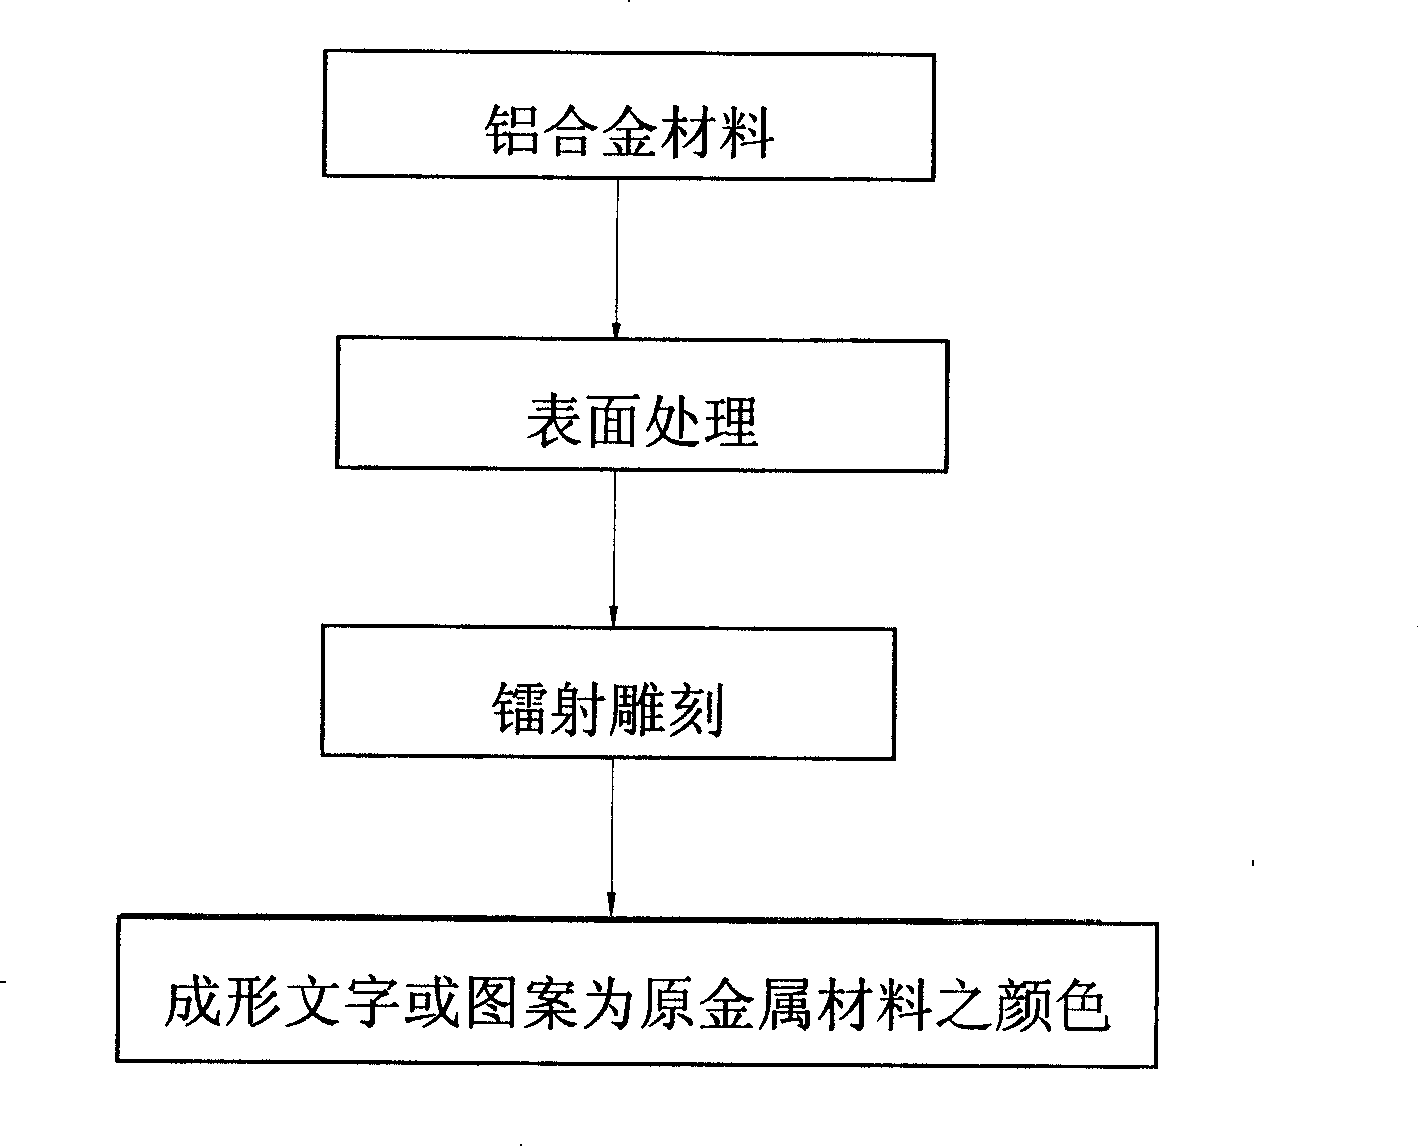 Method for coloring pattern or character on surface of aluminum alloy material and product thereof